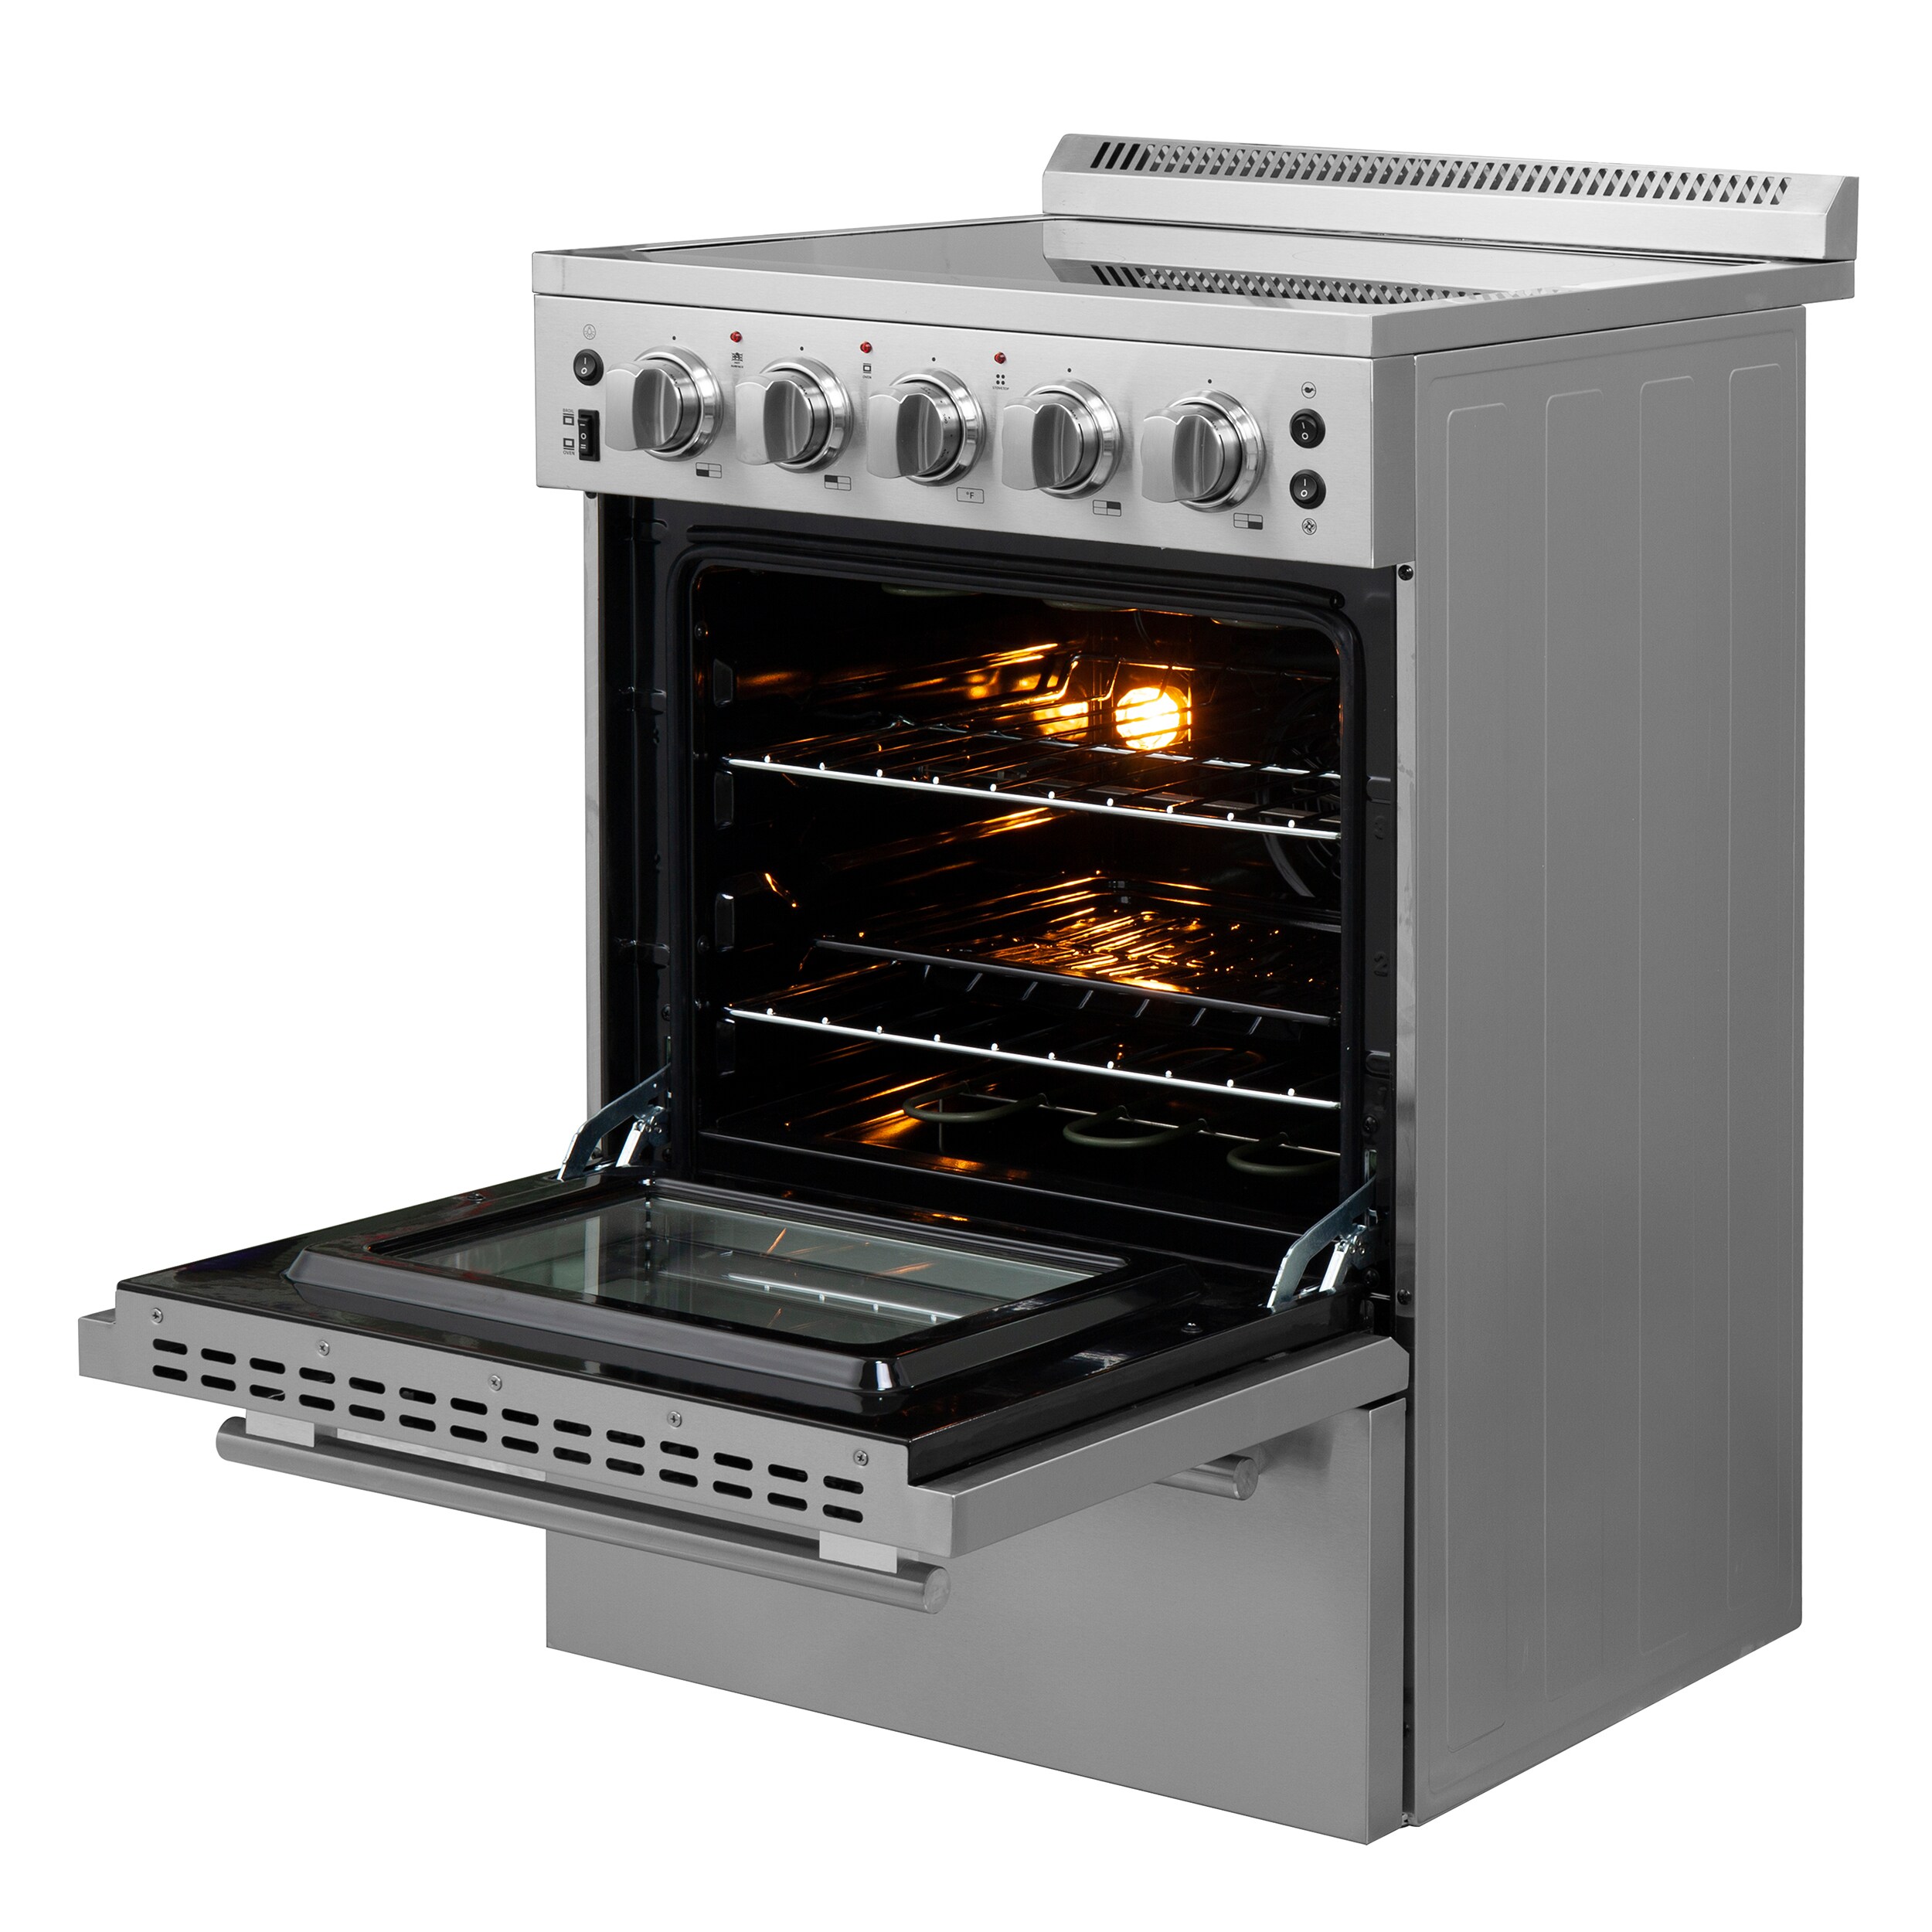 Frigidaire 24 in. Freestanding Electric Range in Stainless Steel